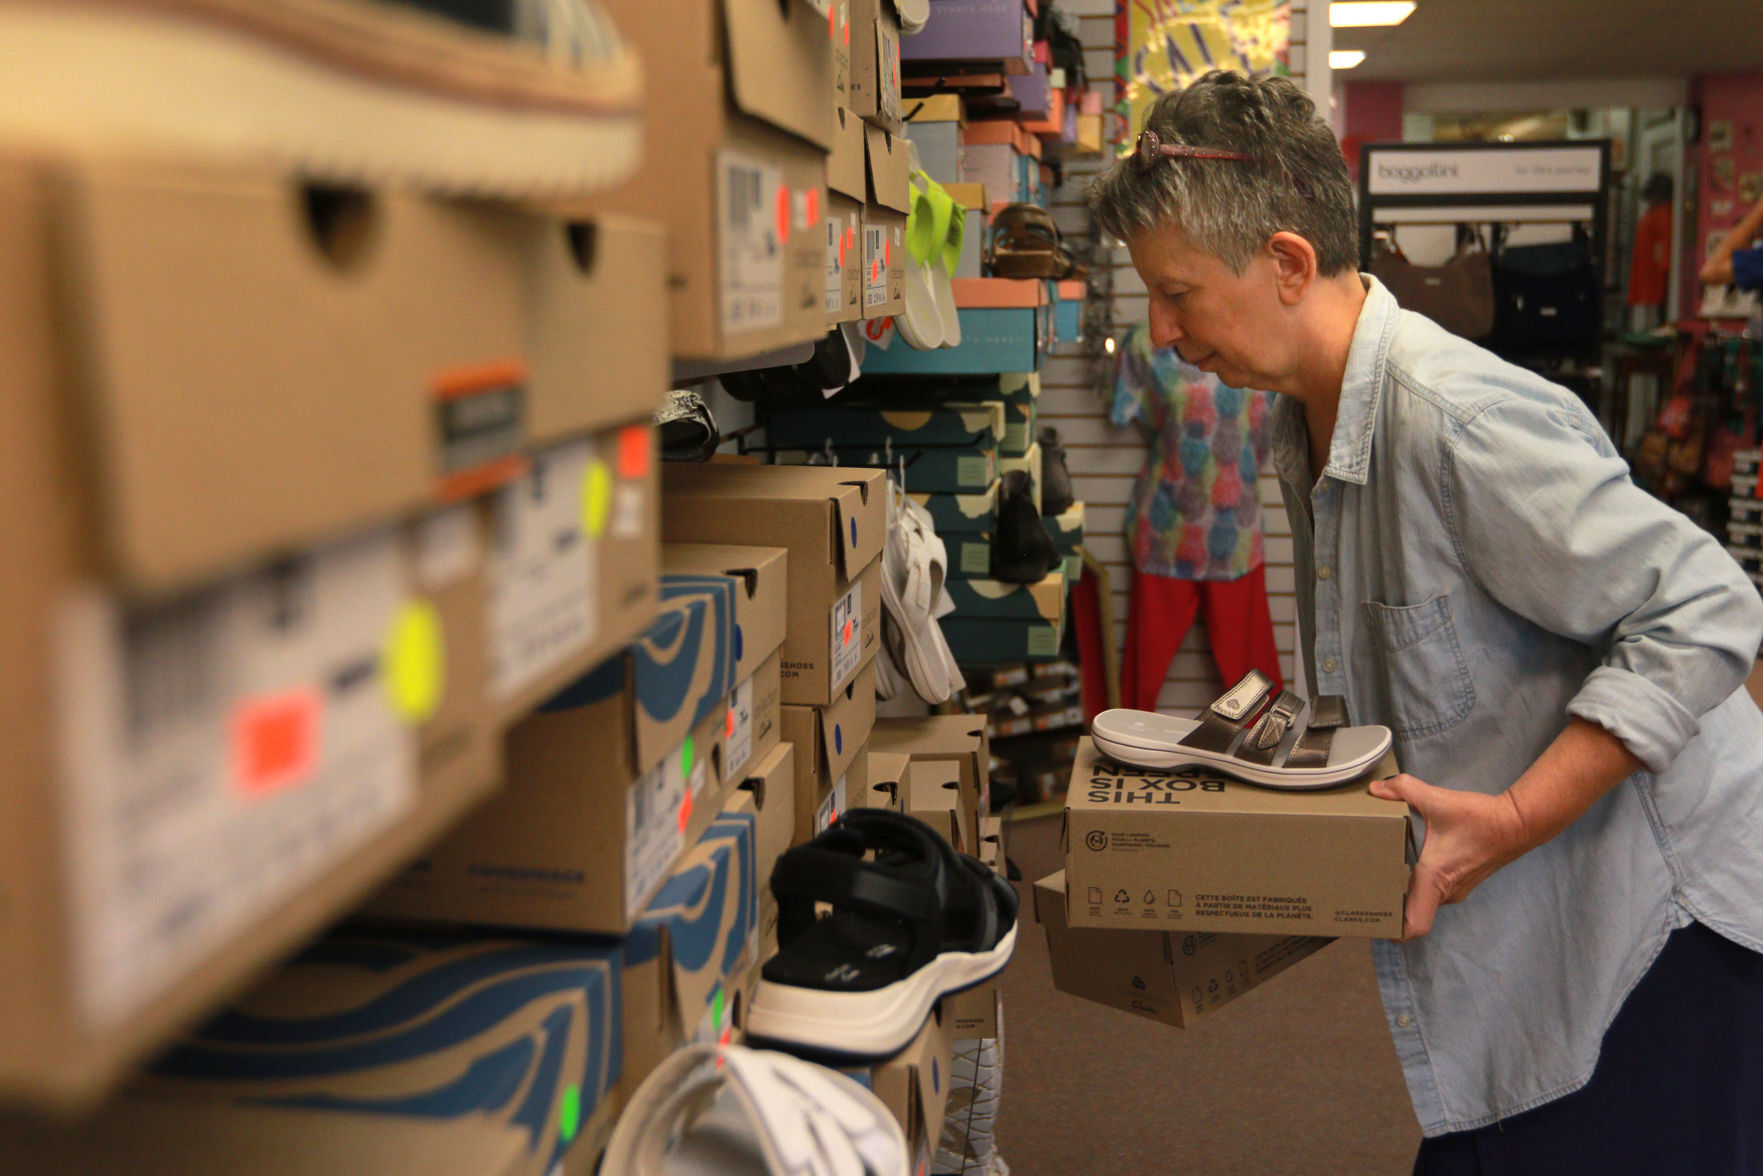 Deb May, of Dubuque, tidies the shoe display at HJ’s Fashion Emporium in Dubuque on Wednesday, Aug. 4, 2021. May has been an employee at the store for two years.    PHOTO CREDIT: Katie Goodale